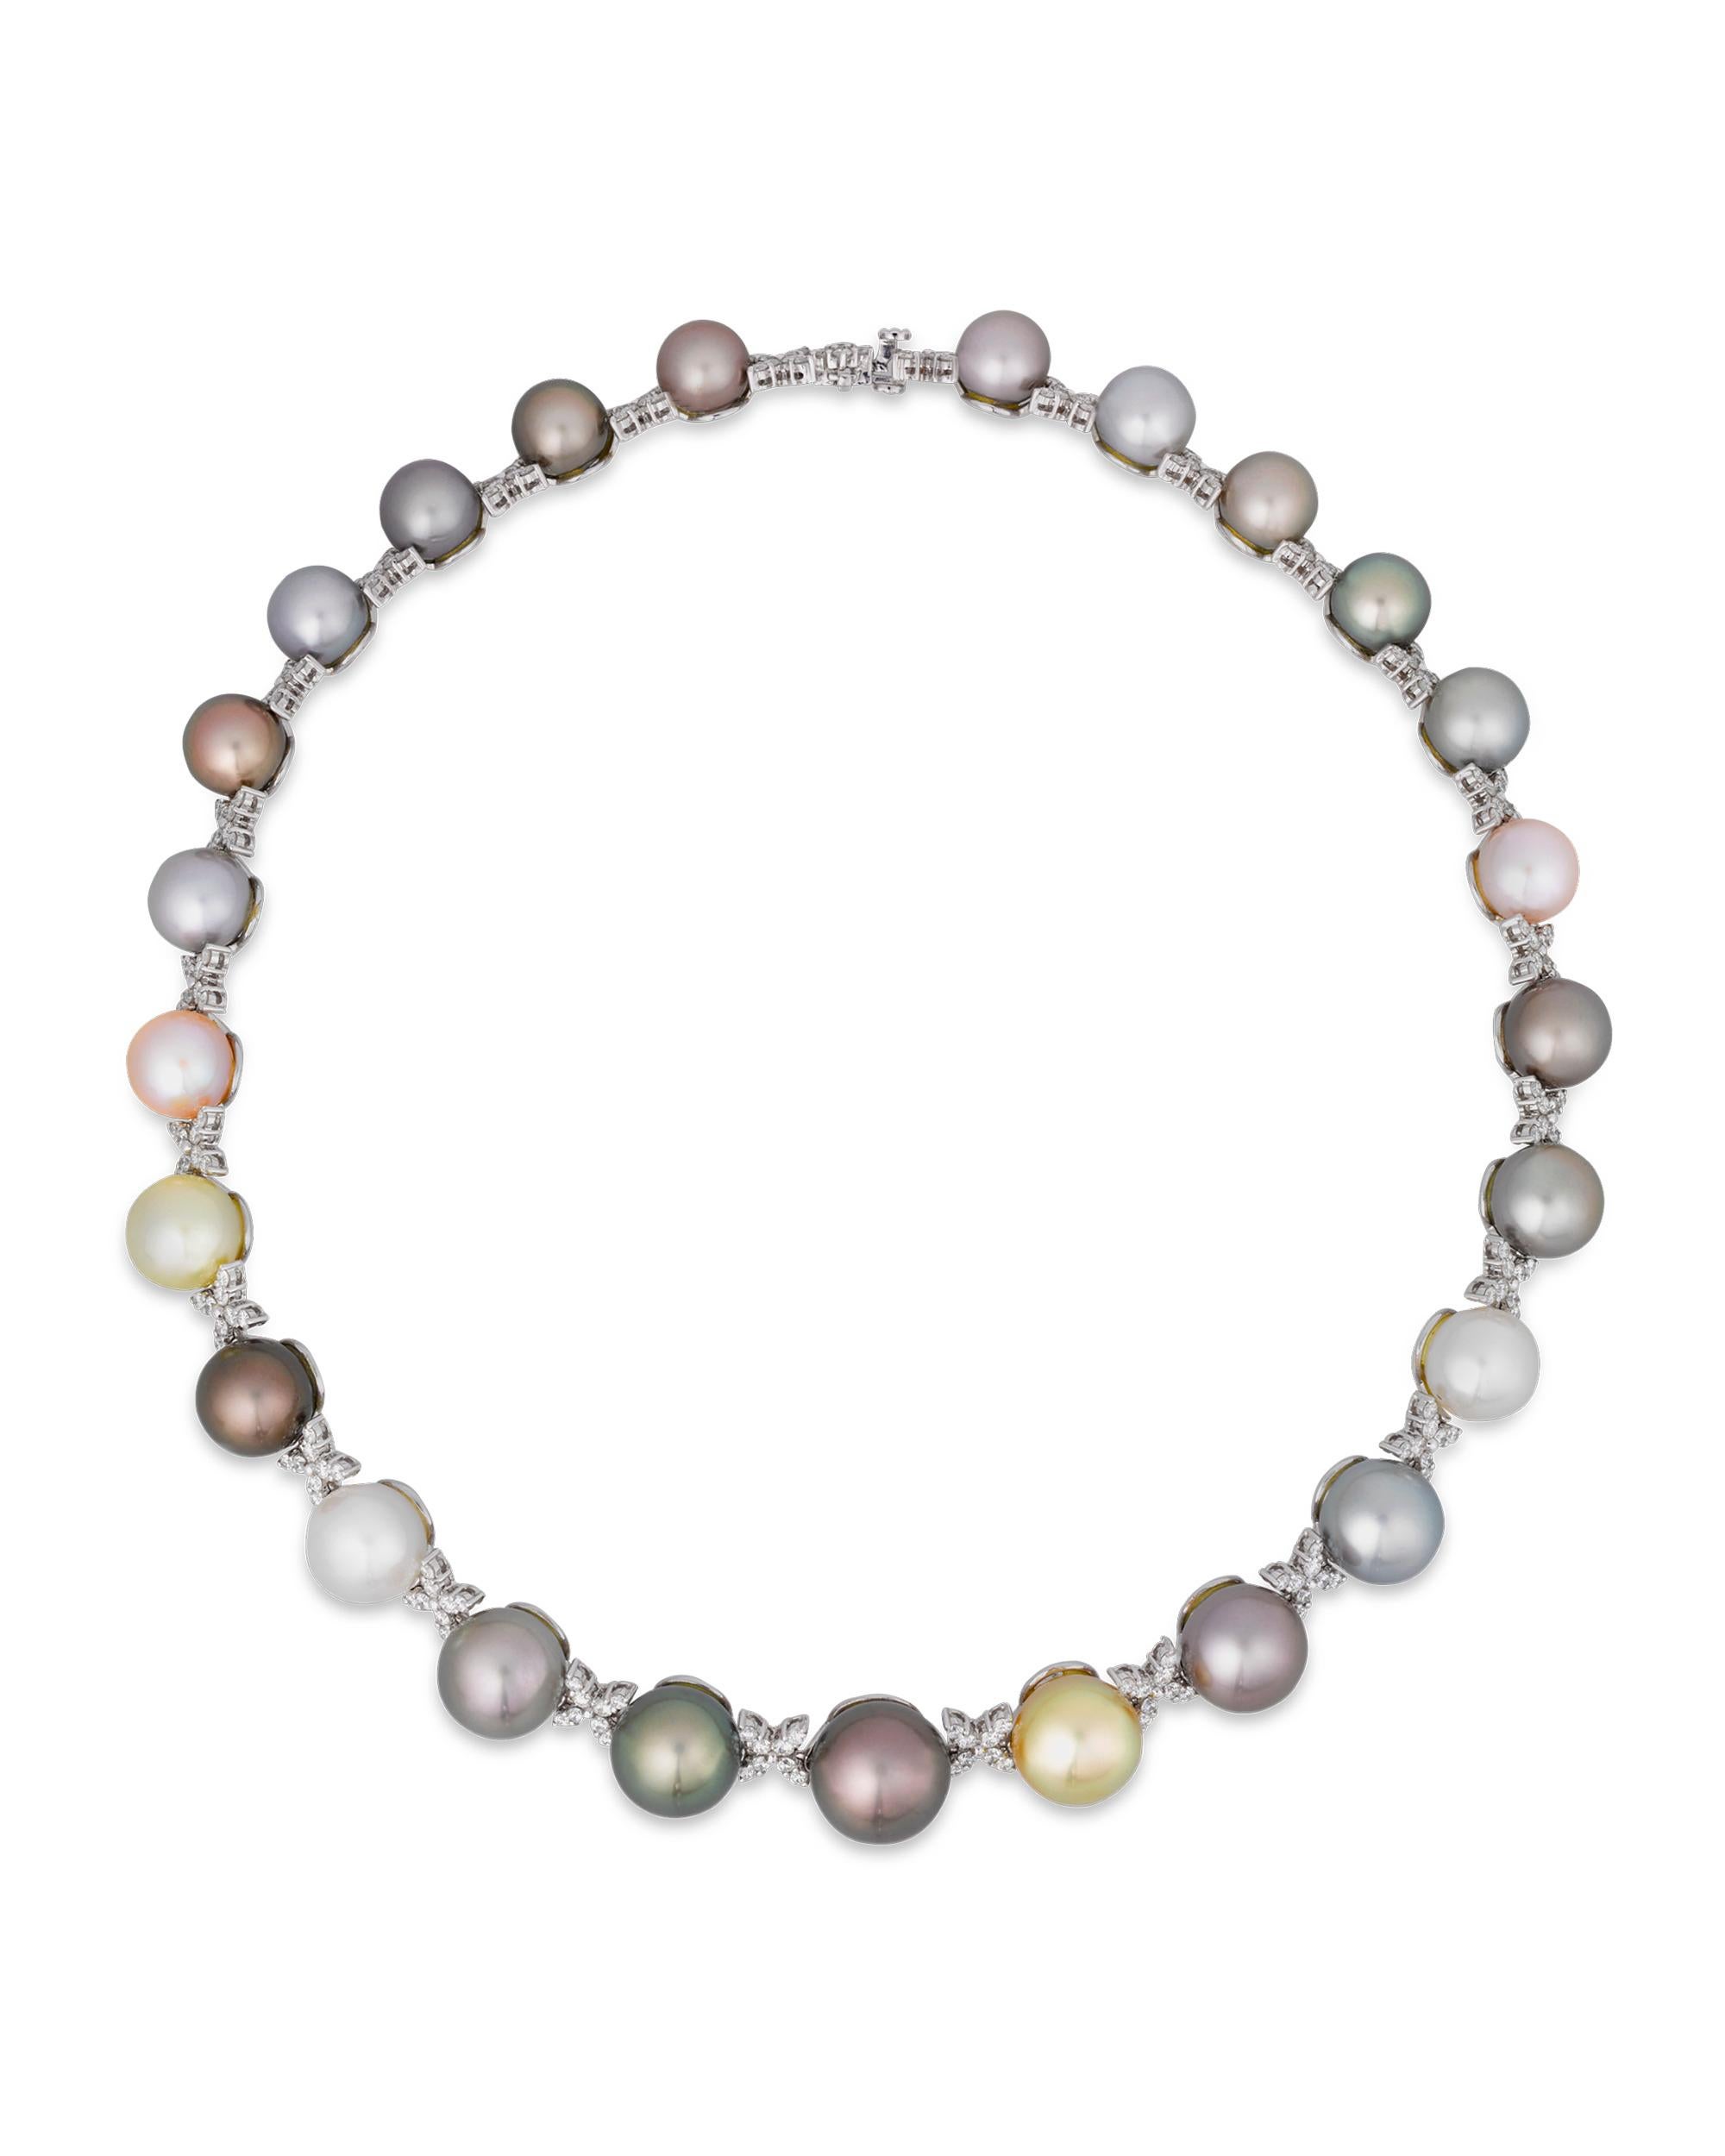 multi-colored tourmaline beaded necklace with tahitian cultured pearl roundel